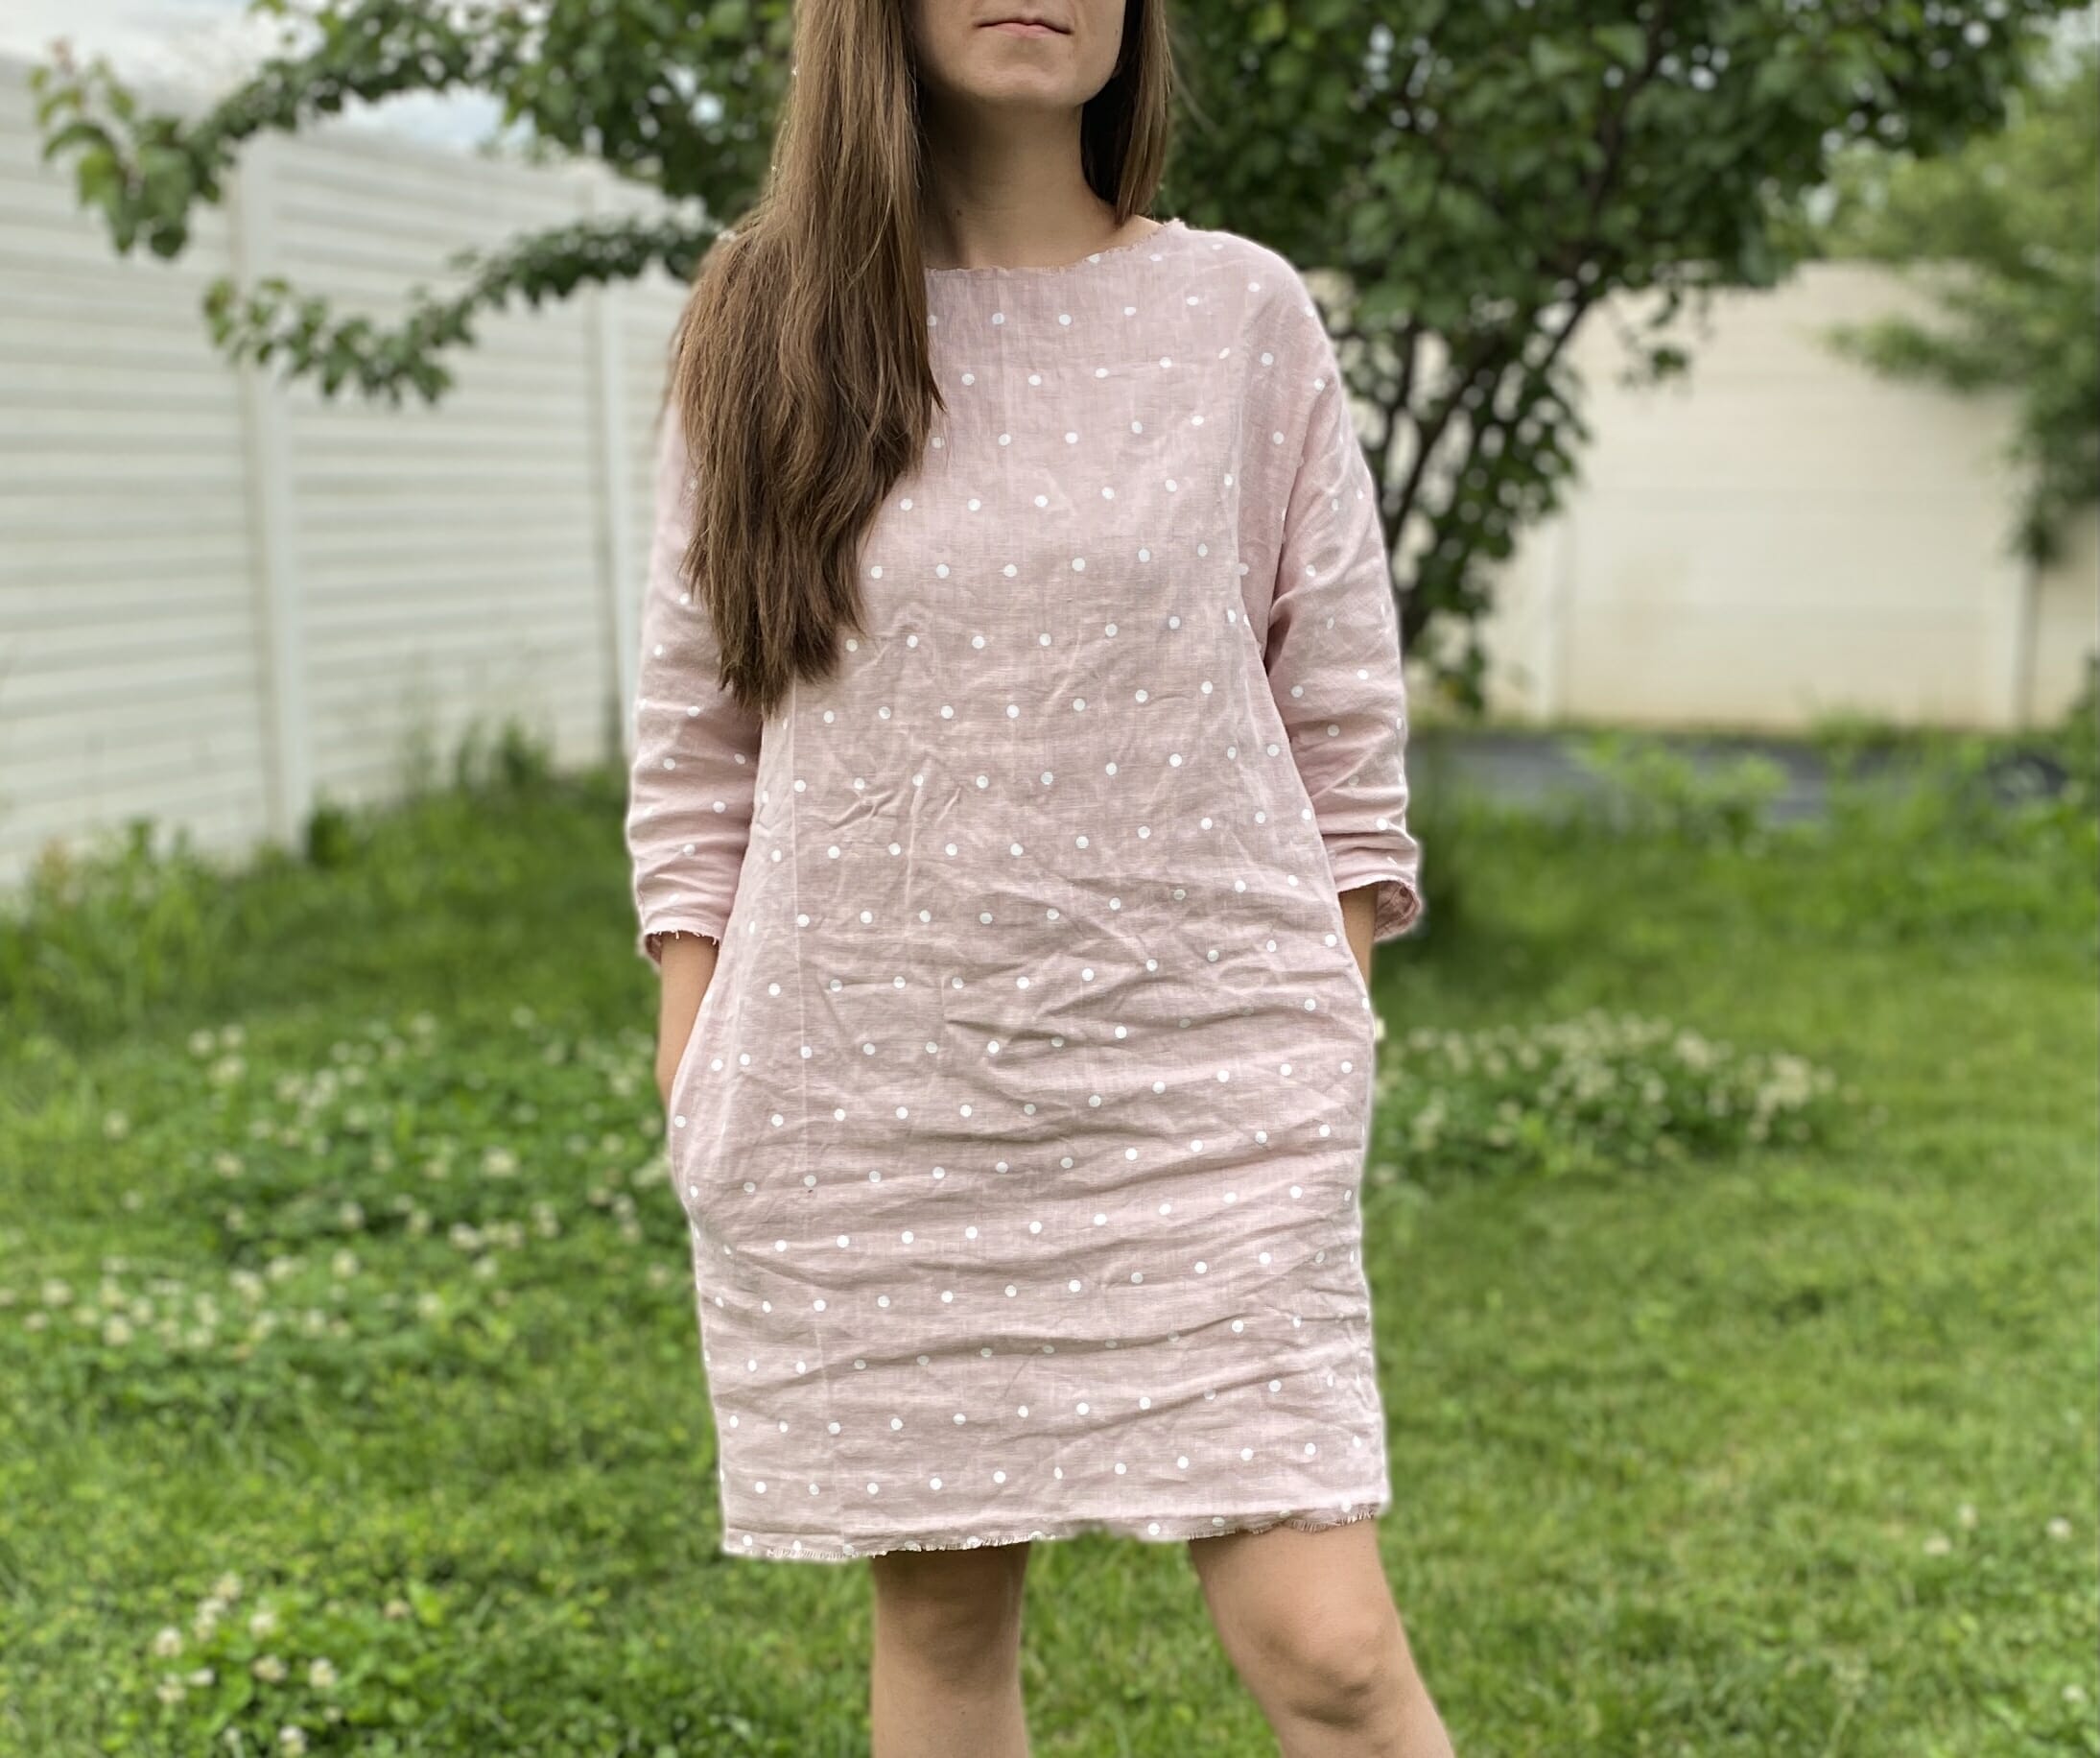 DIY tunic linen dress tutorial - I Can Sew This